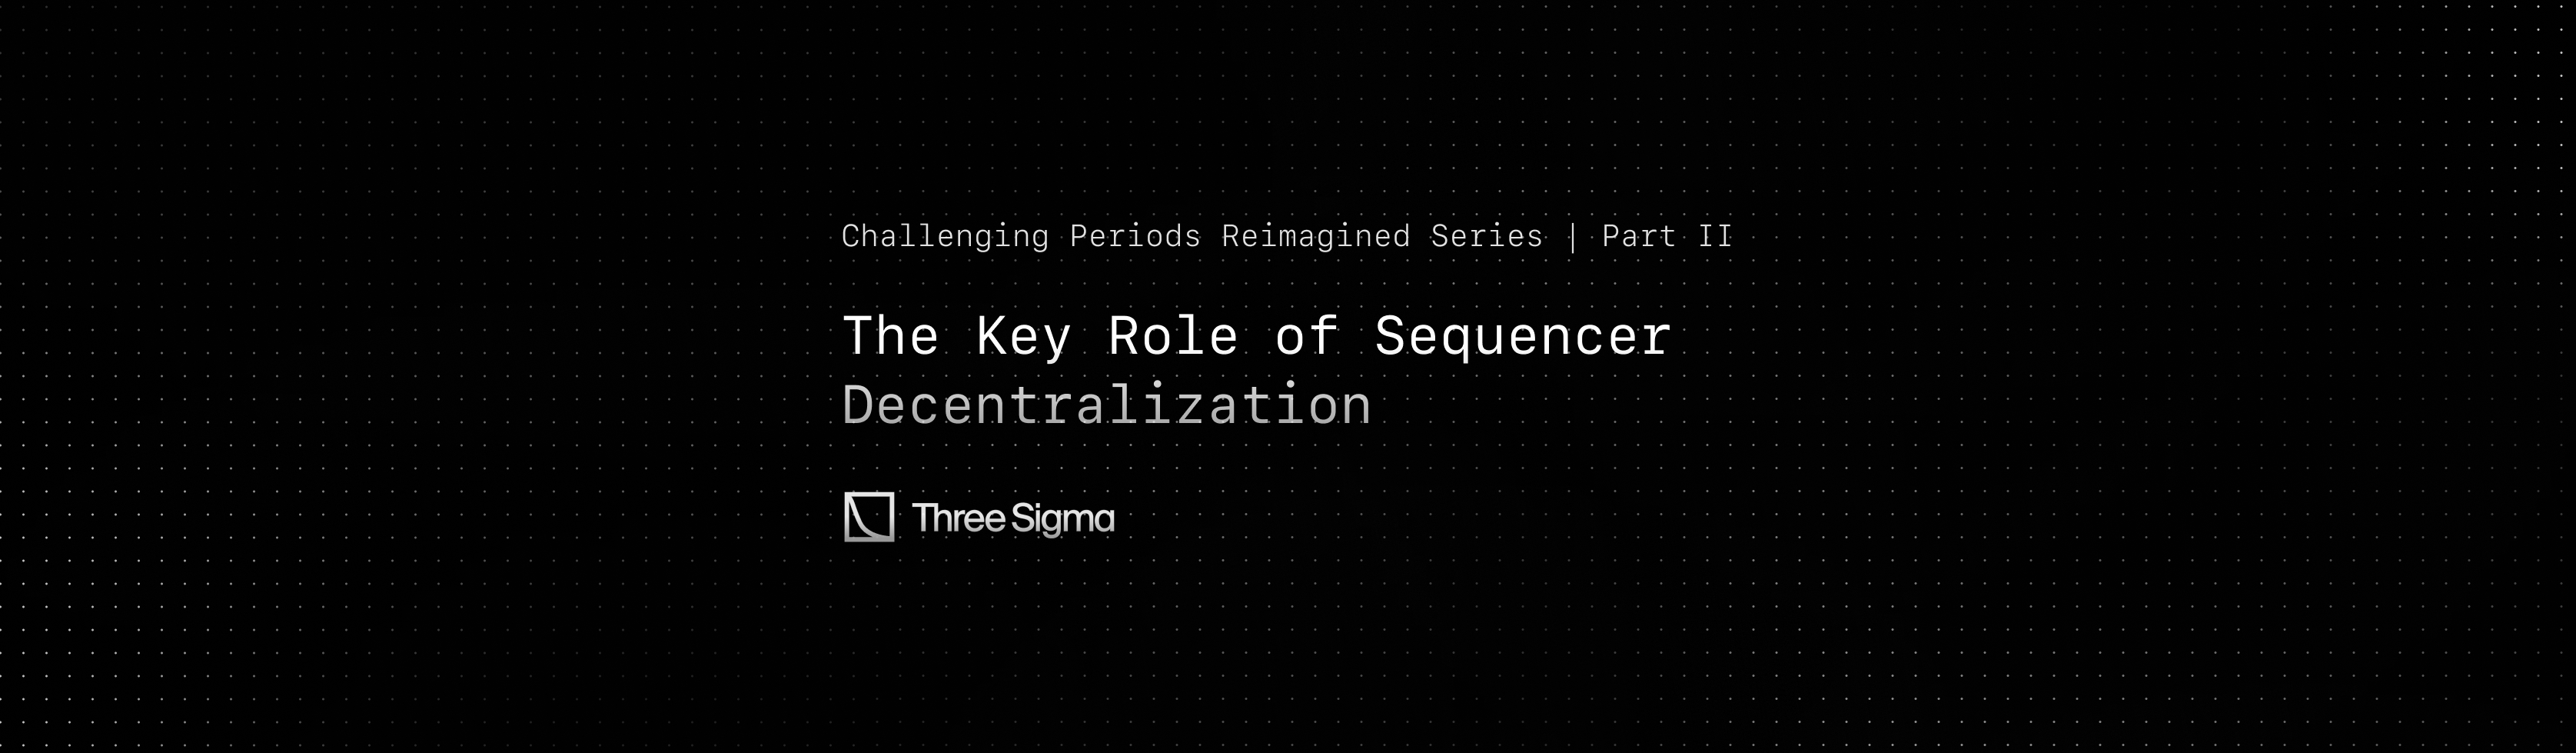 Cover Image for Challenging Periods Reimagined Part II - The Key Role of Sequencer Decentralization